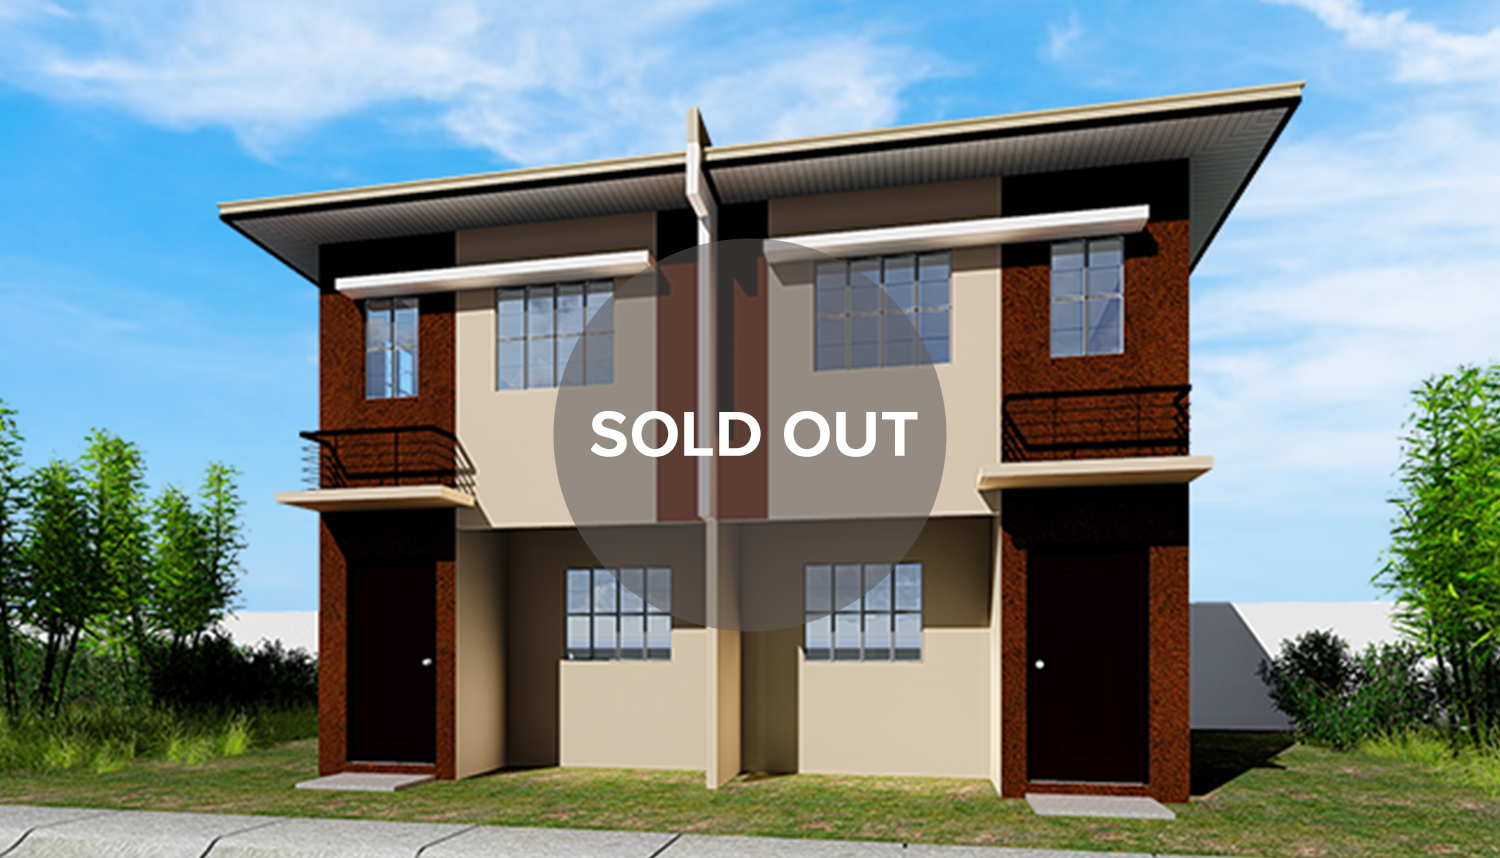 lumina angeli duplex sold out | Affordable House and Lot For Sale In The Philippines